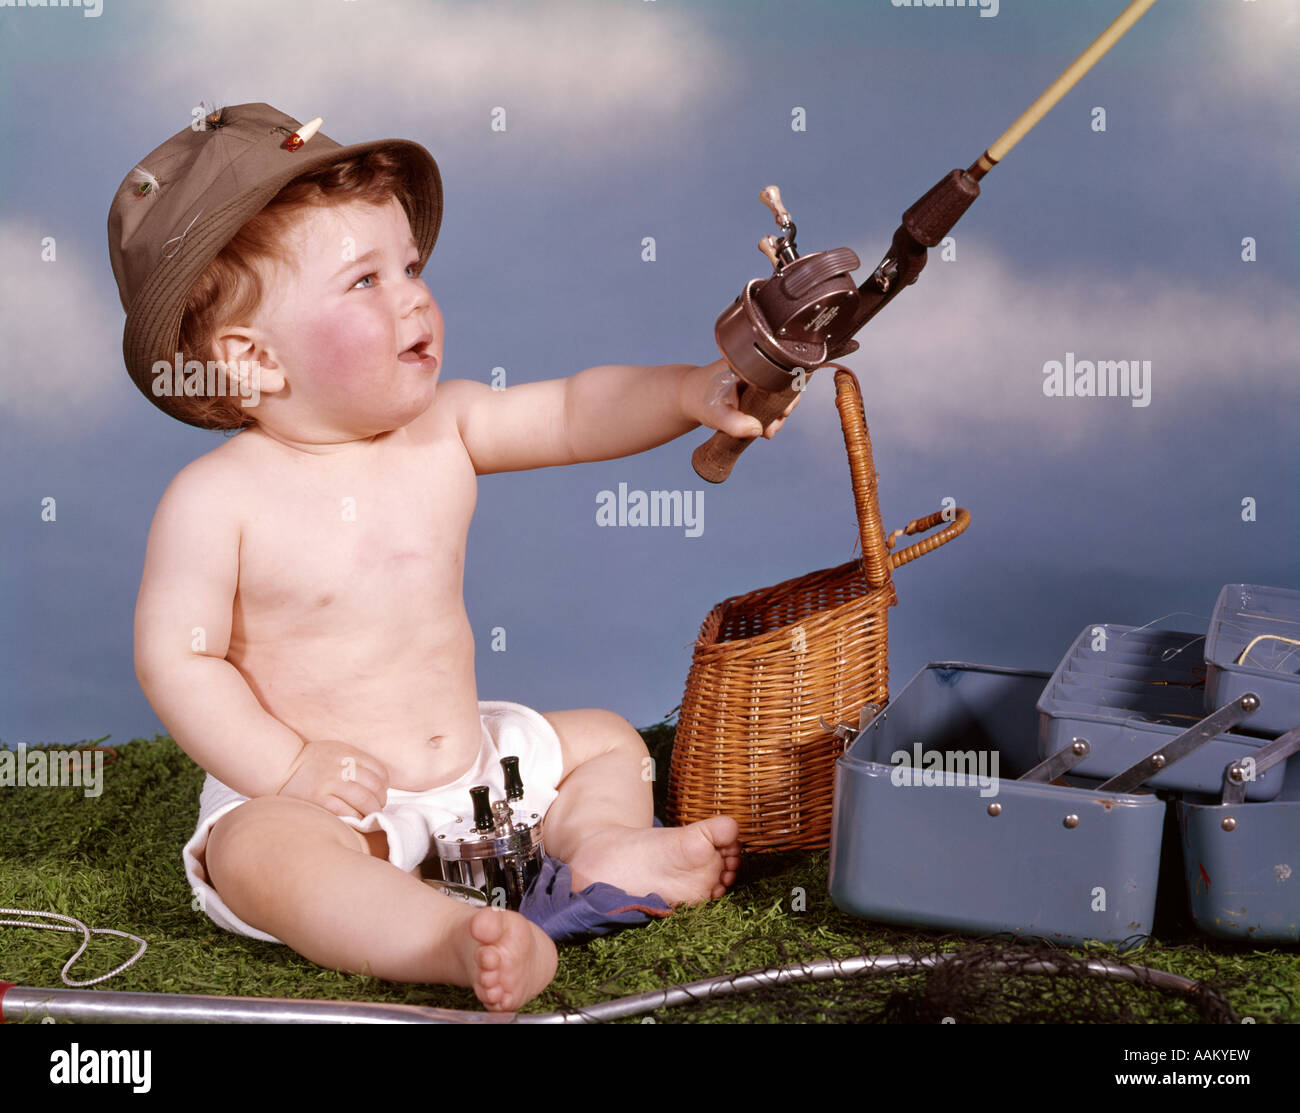 BABY WITH FISHING HAT AND GEAR HOLDING 